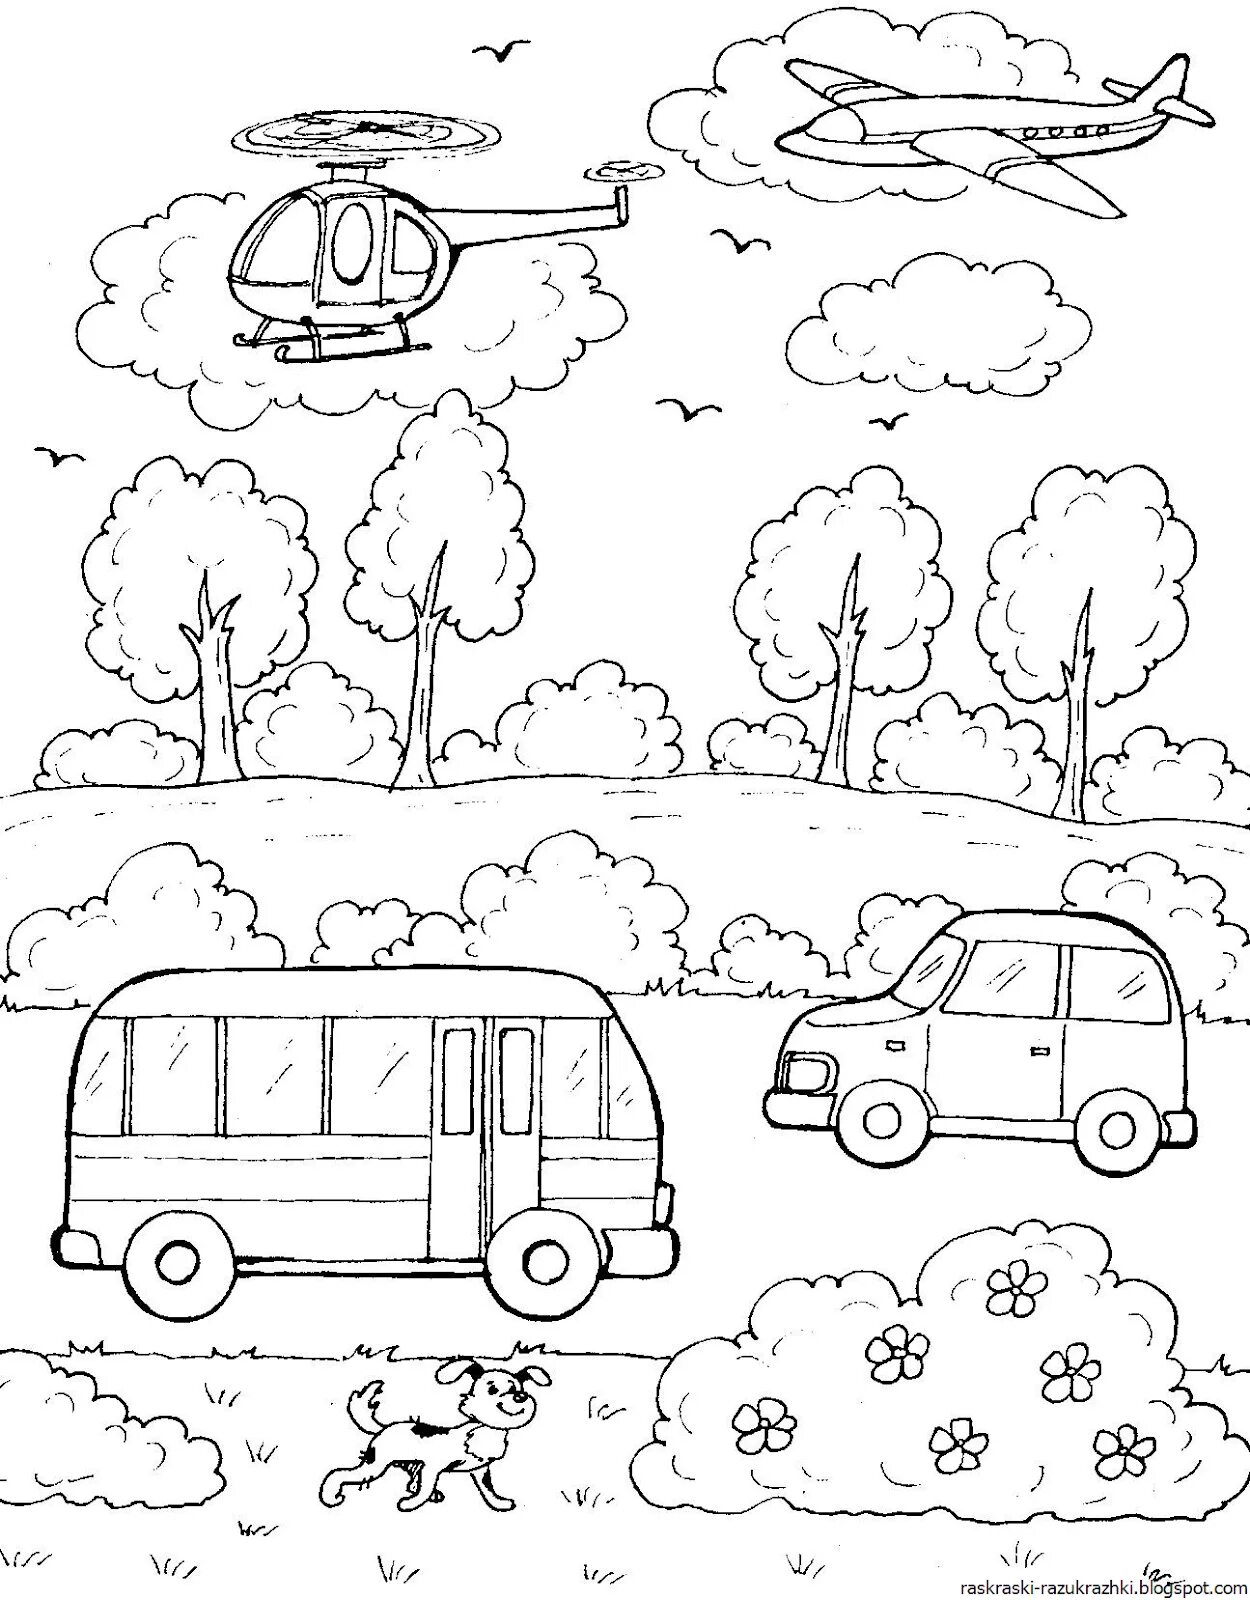 A fun canoe coloring book for 6-7 year olds